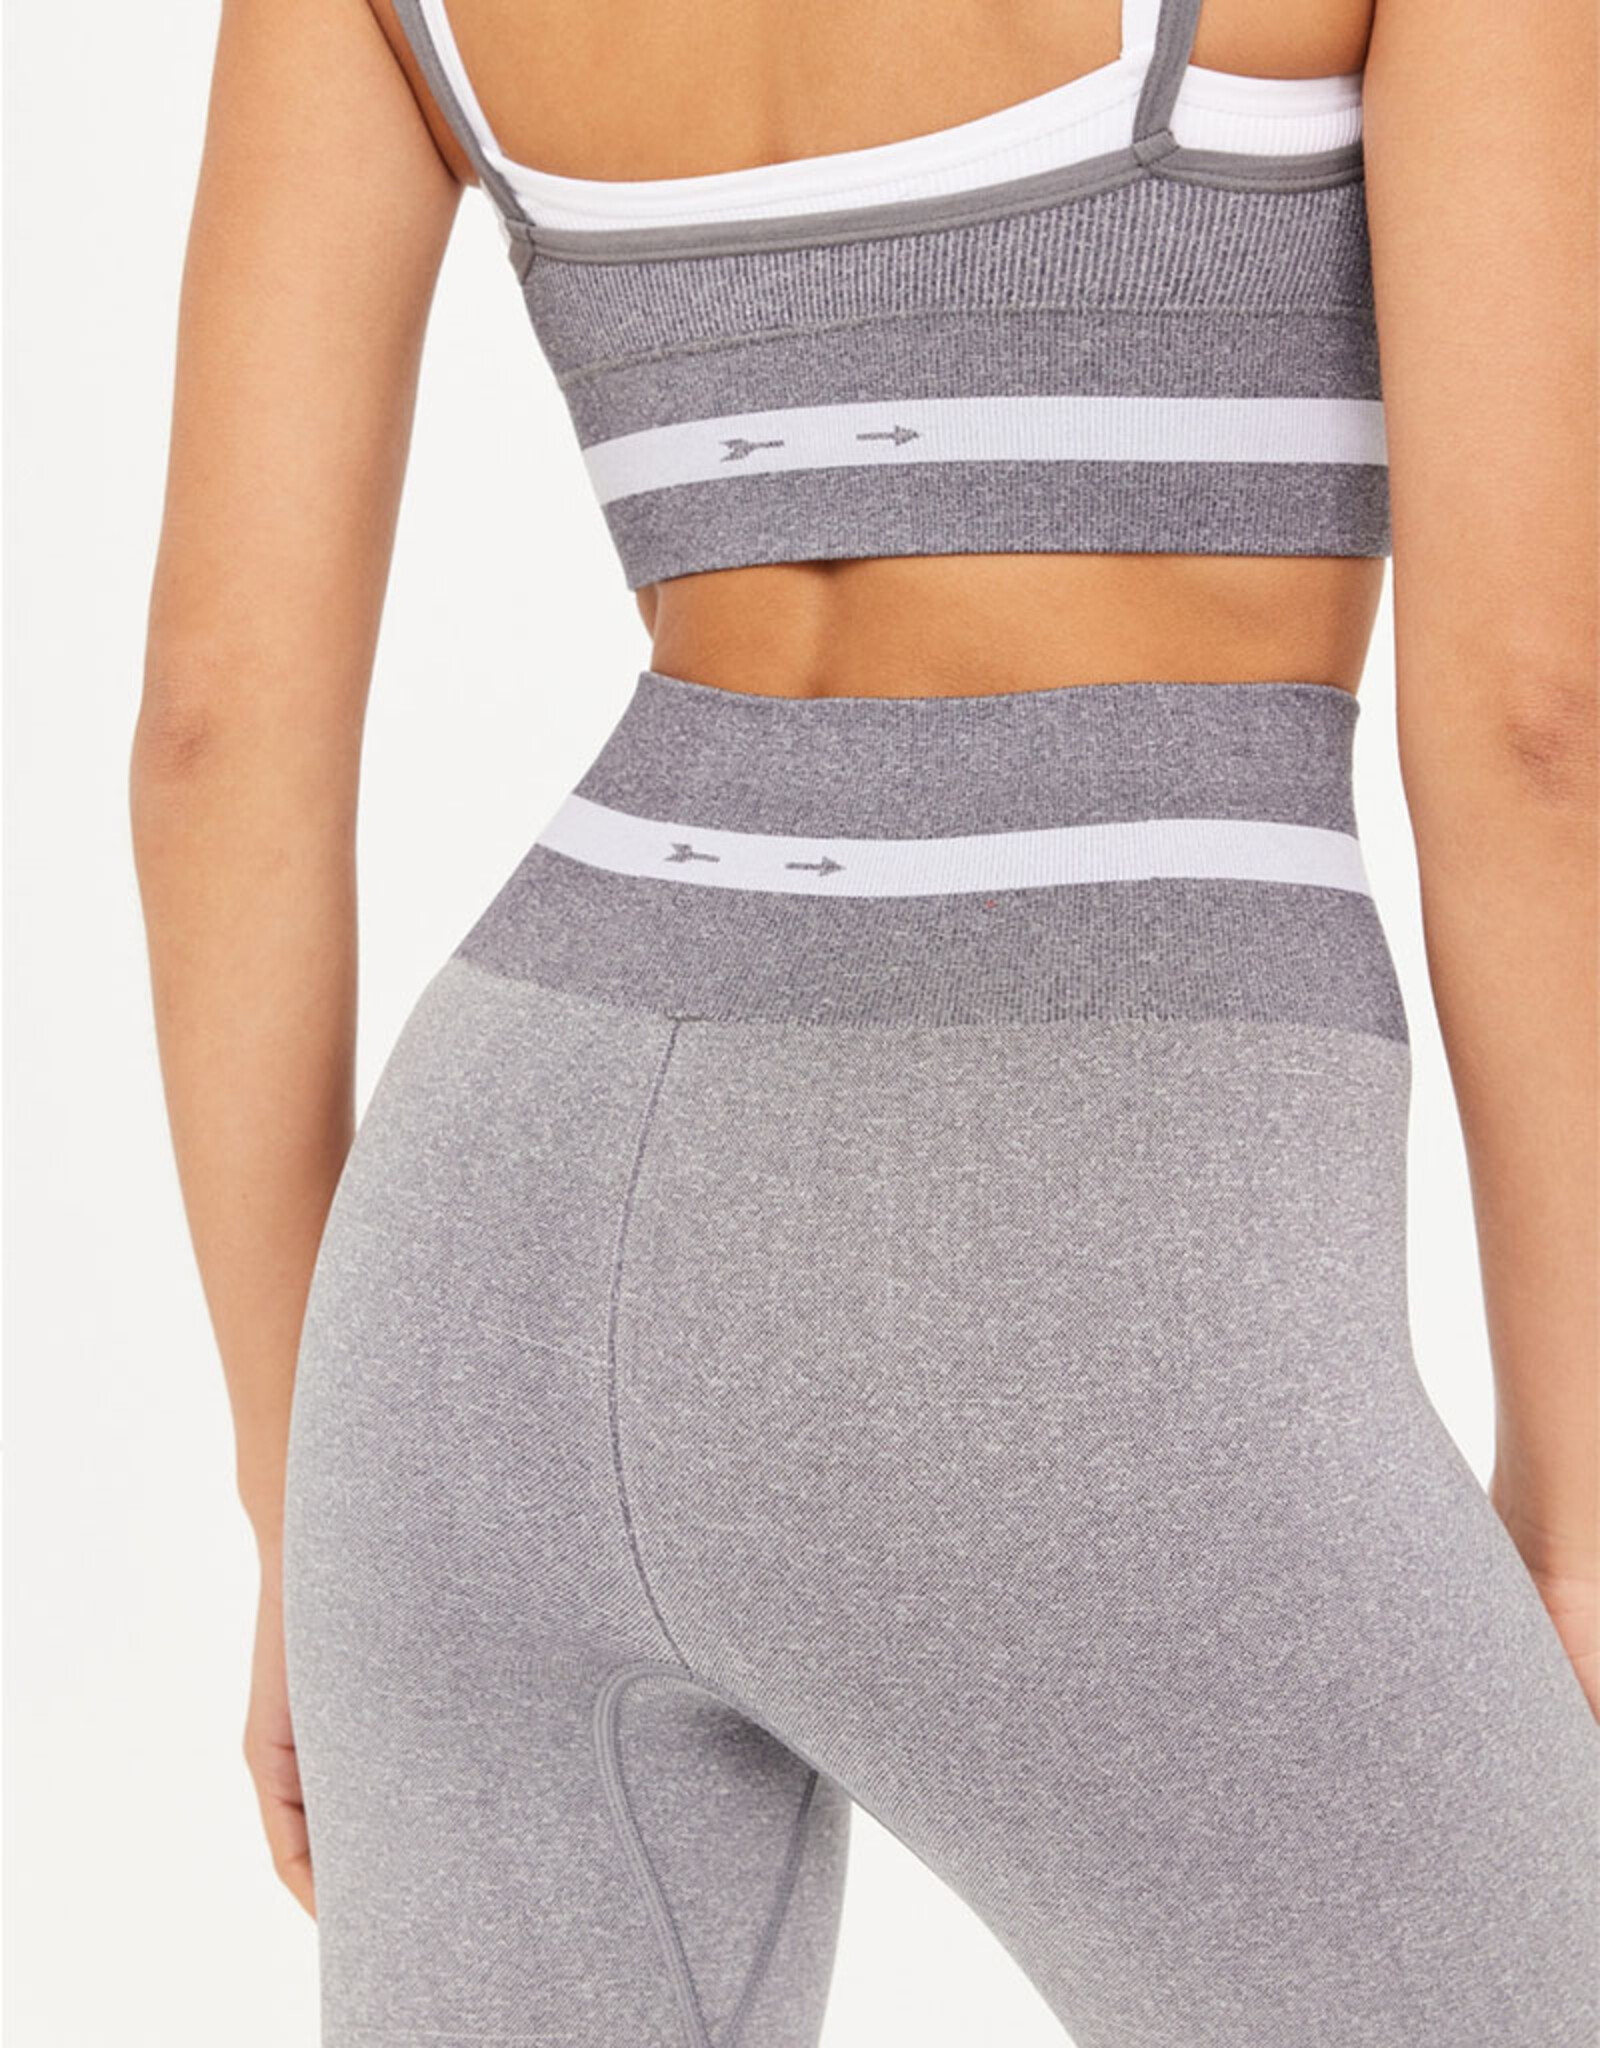 THE UPSIDE FORM SEAMLESS 25IN MIDI  PANT